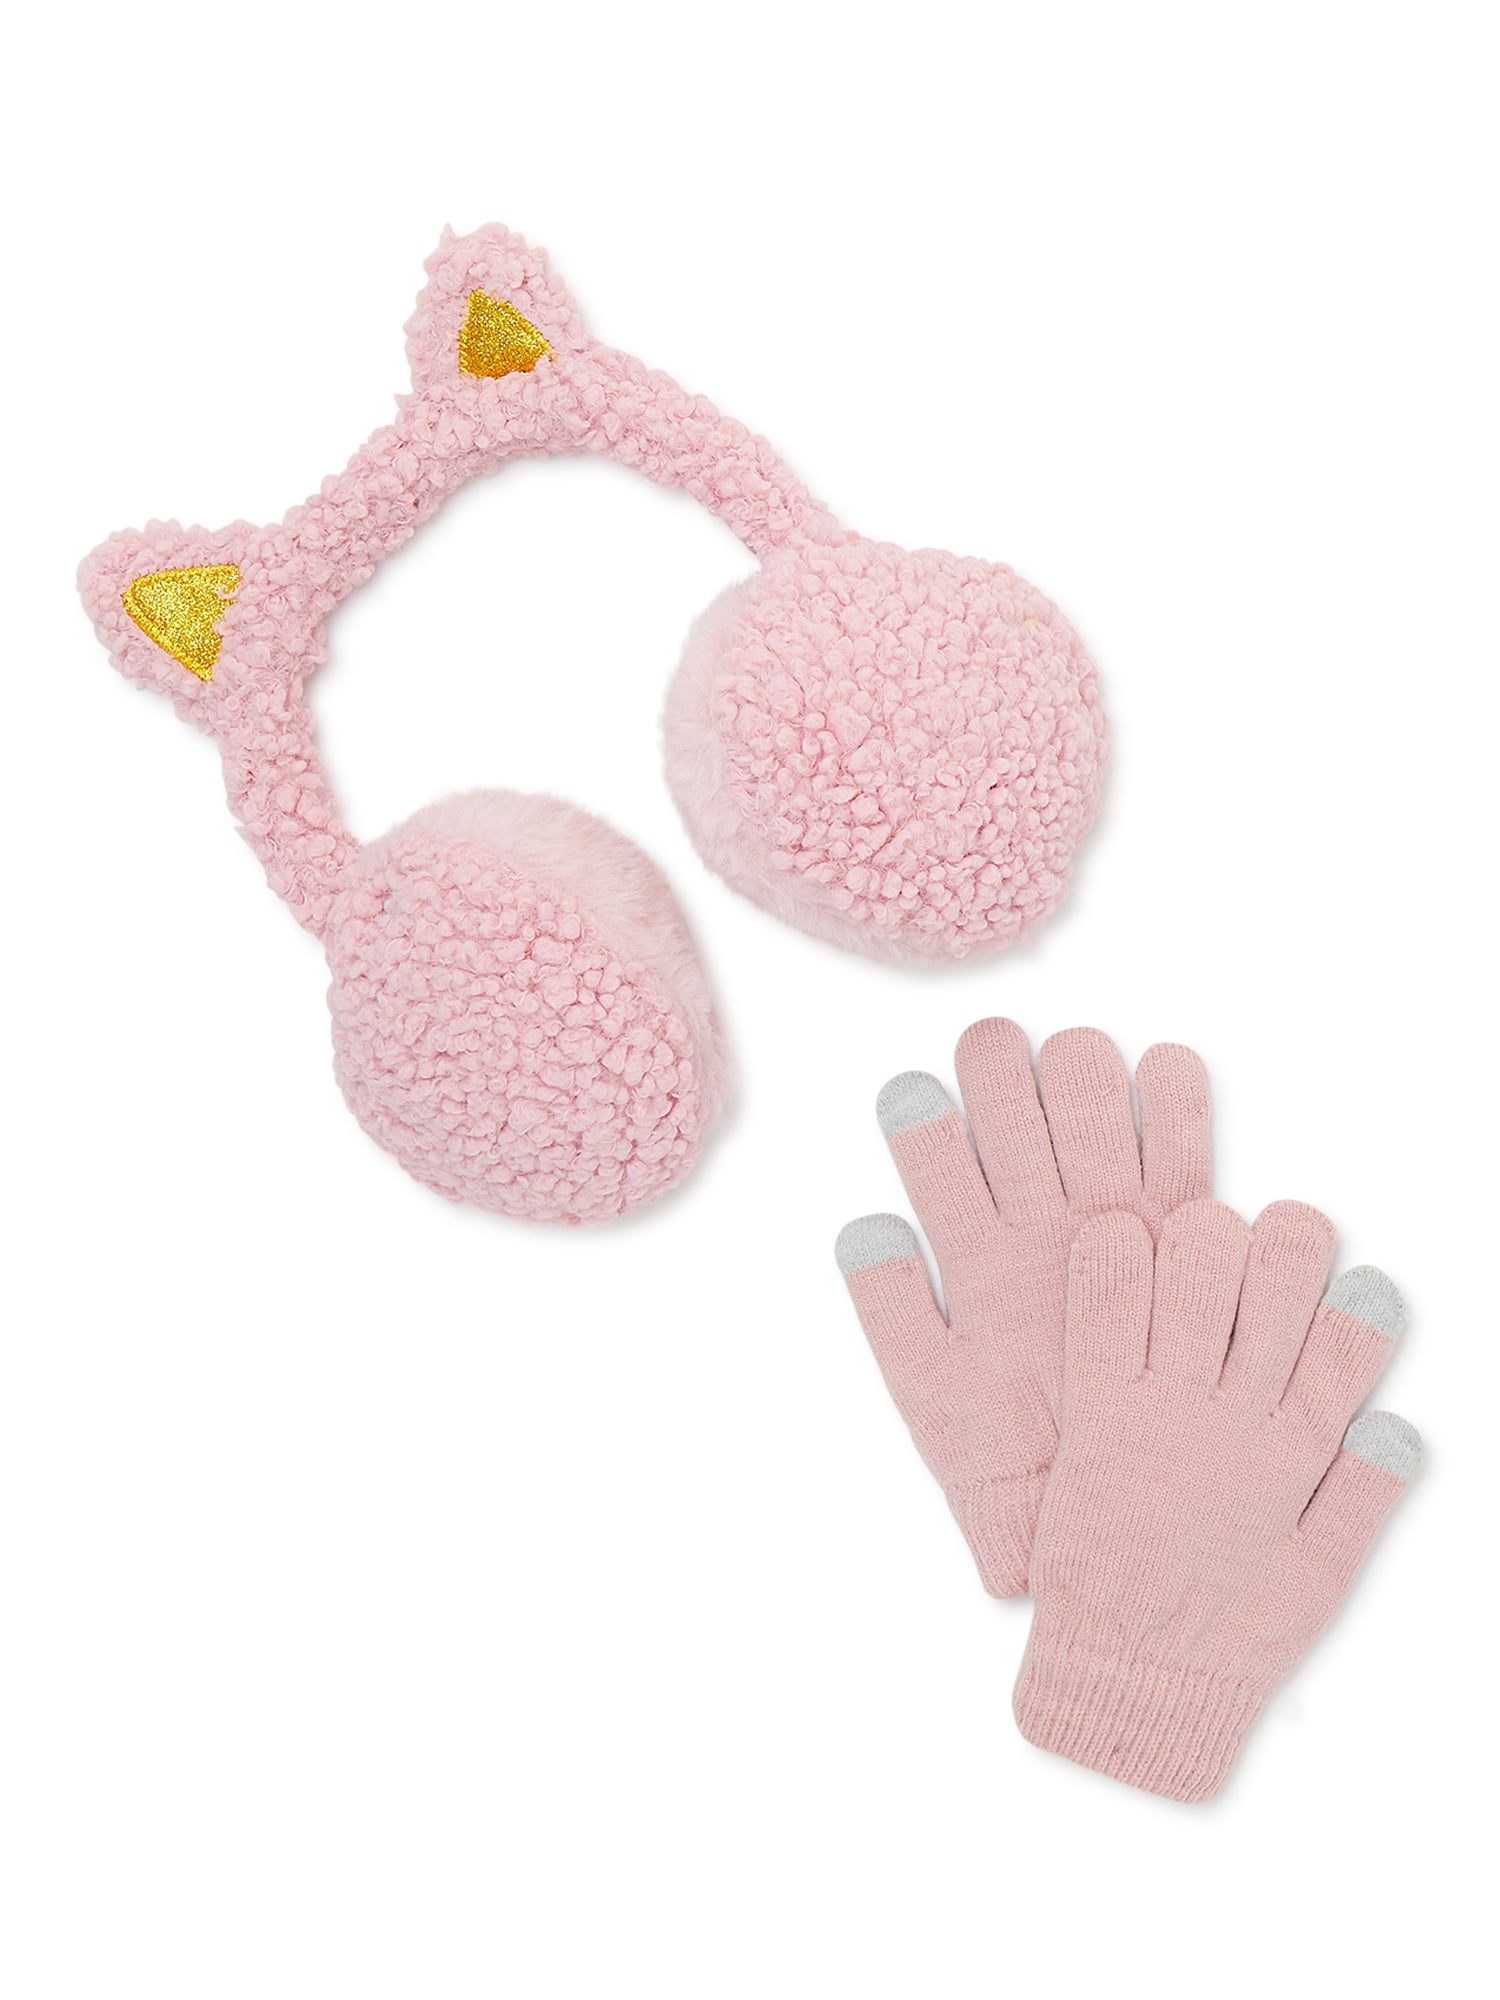 Wonder Nation Girls Earmuff and Gloves Set, 2-Piece, One Size Fits Most